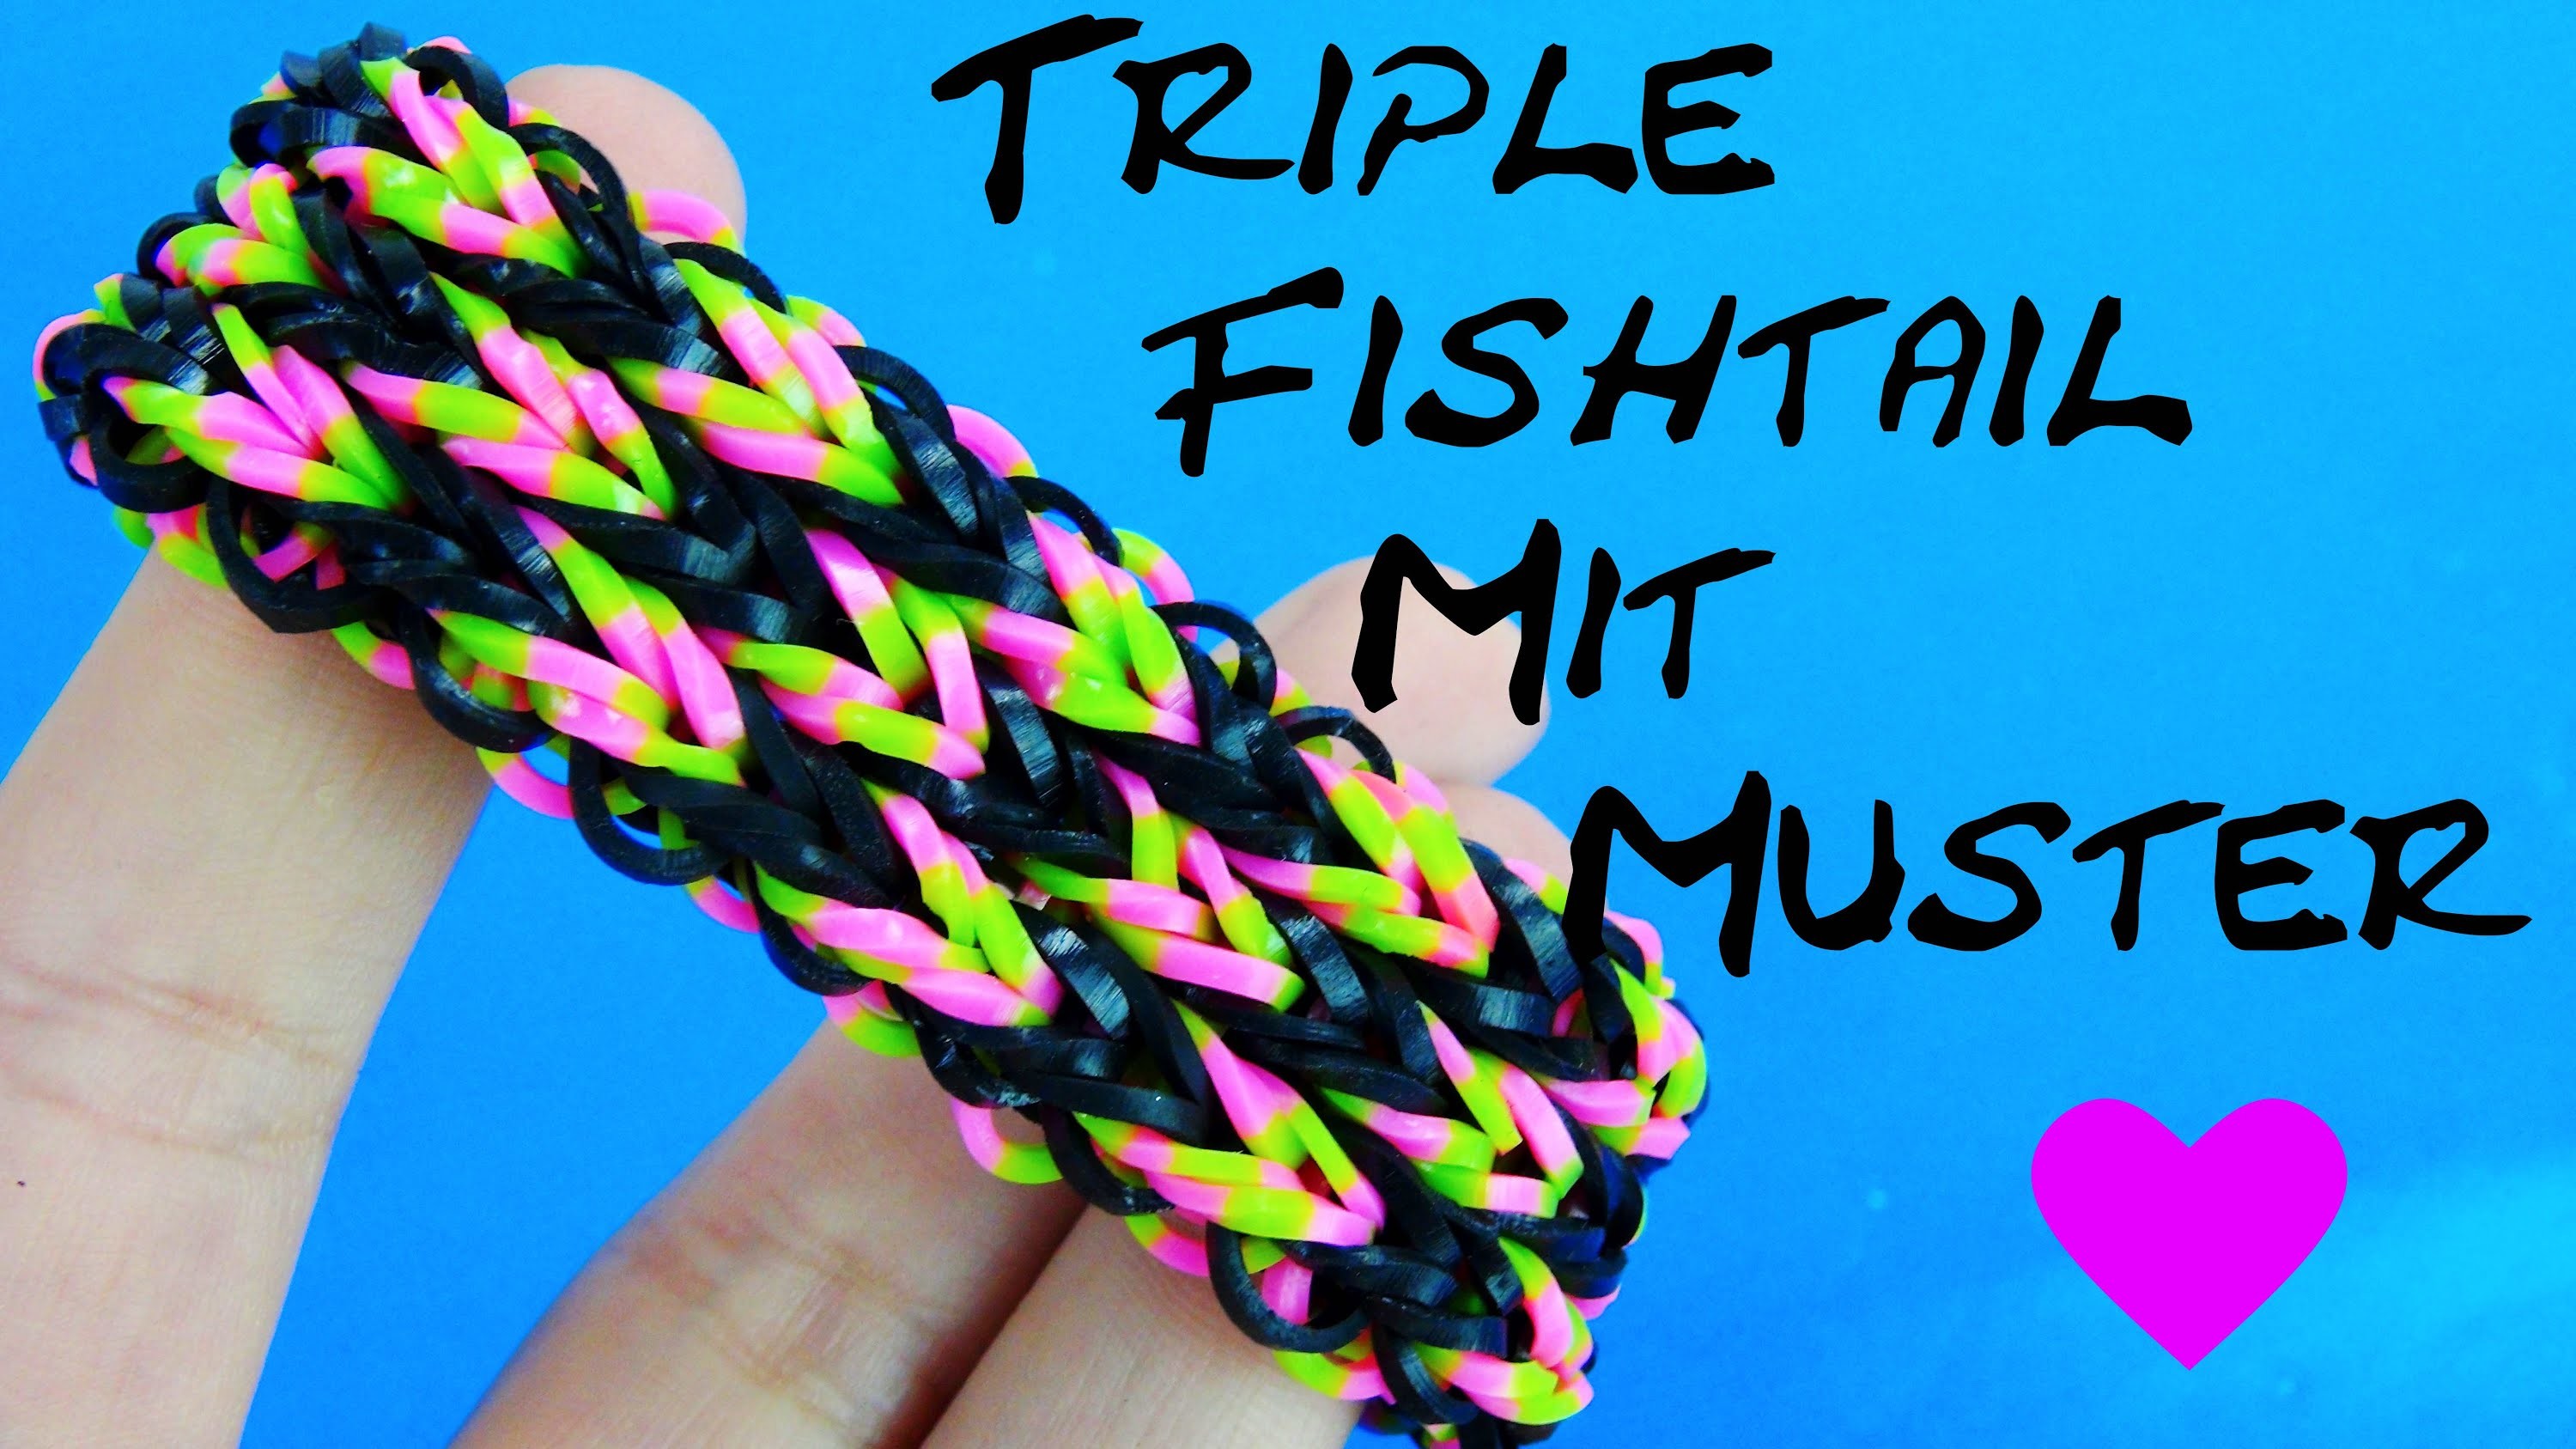 Loom Bandz Dreifach Armband Anleitung DIY Triple Fishtail Mit Muster How-to Tutorial